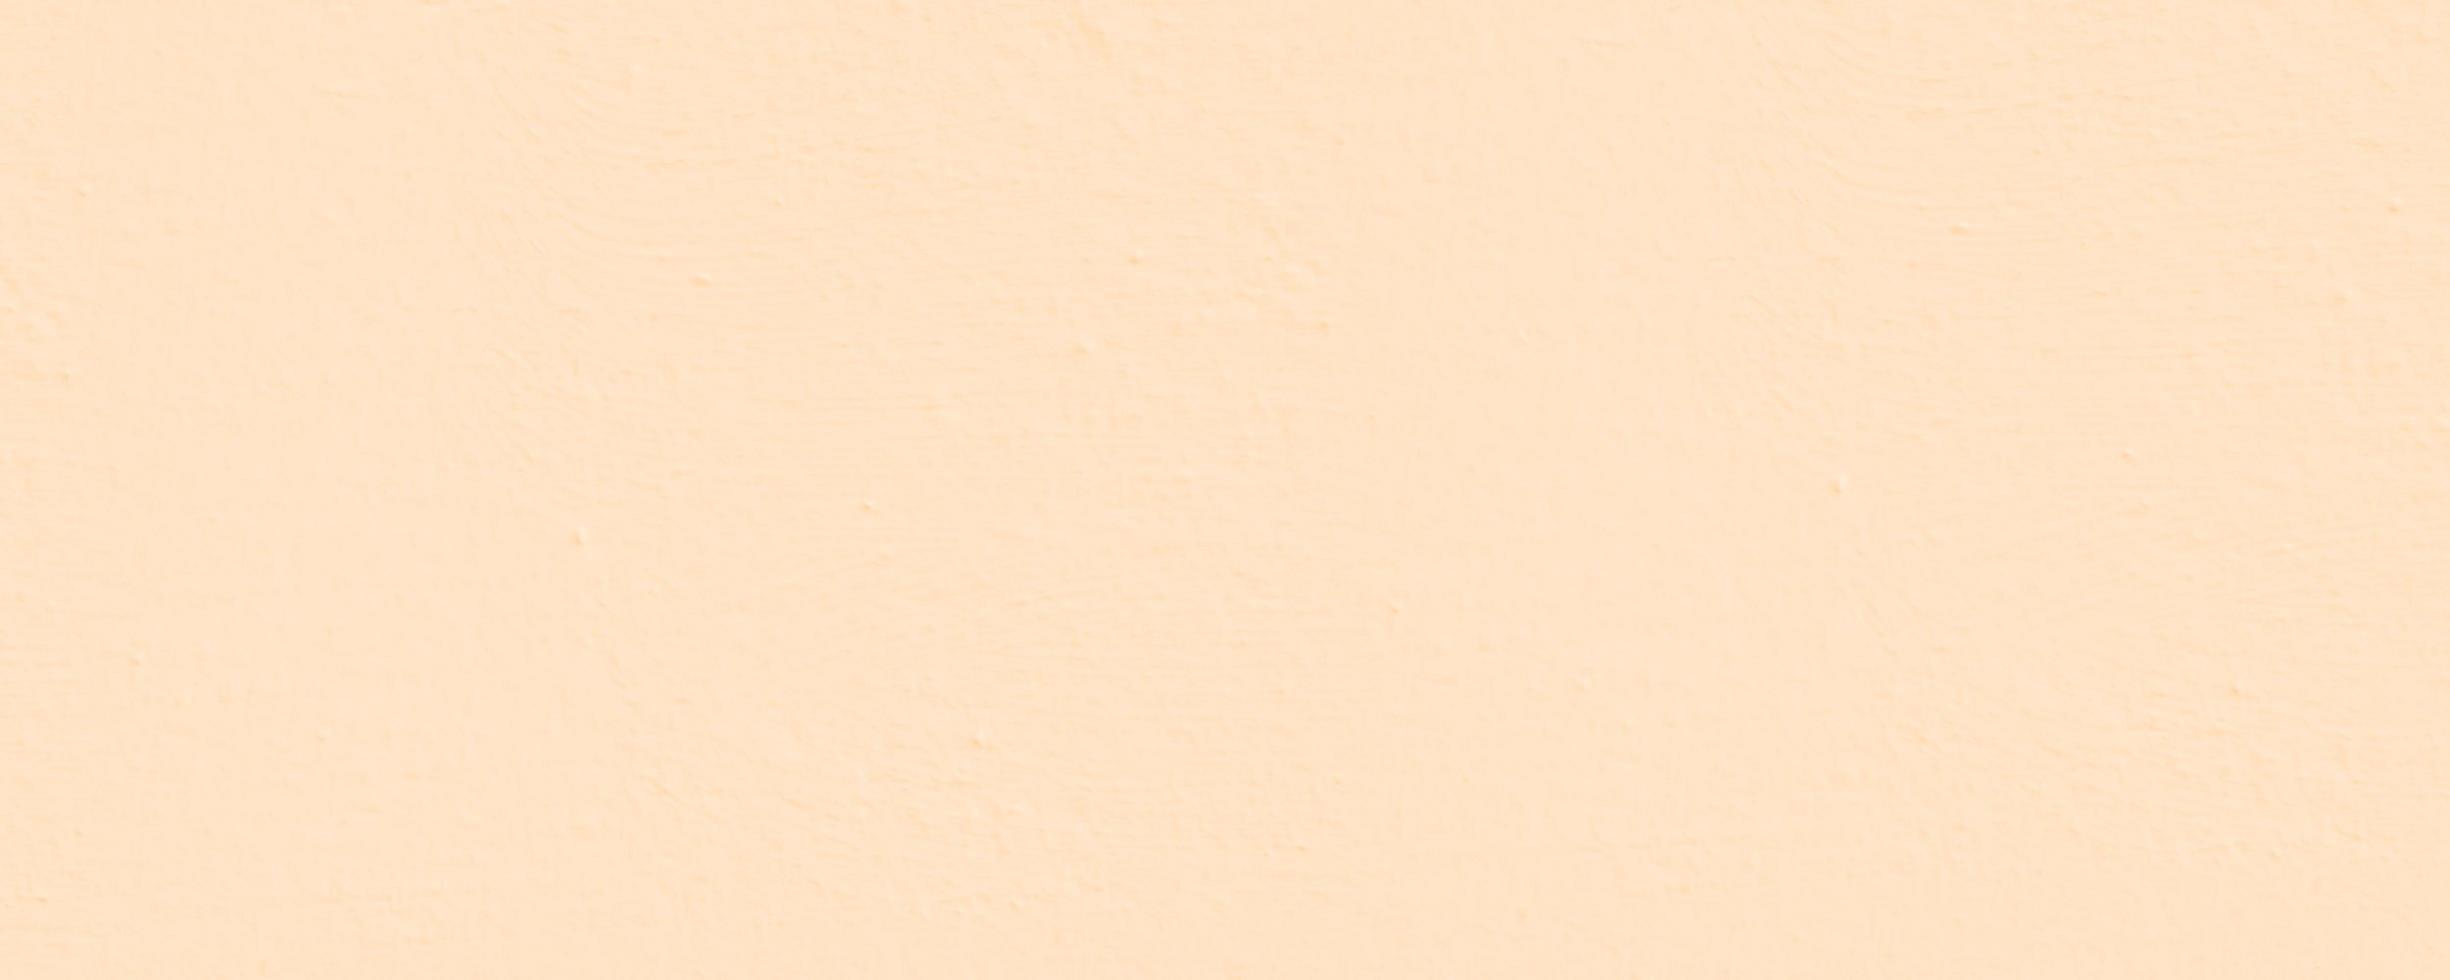 Rose Gold Emulsion wall paint texture rectangle background photo